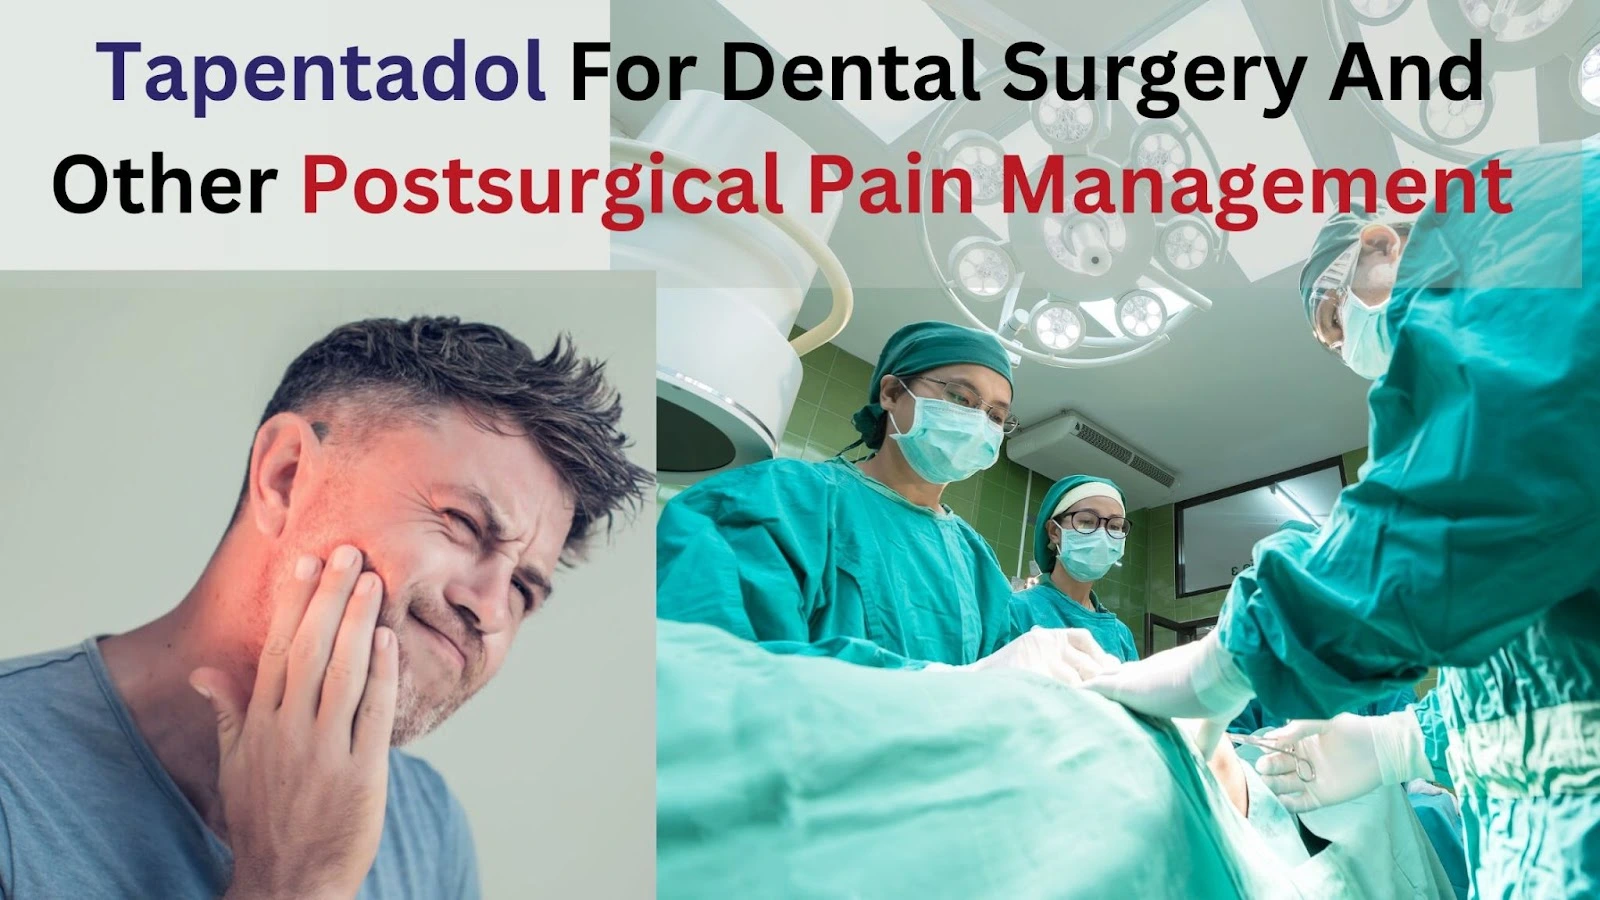 Use Of Tapentadol For Dental Surgery And Other Postsurgical Pain Management